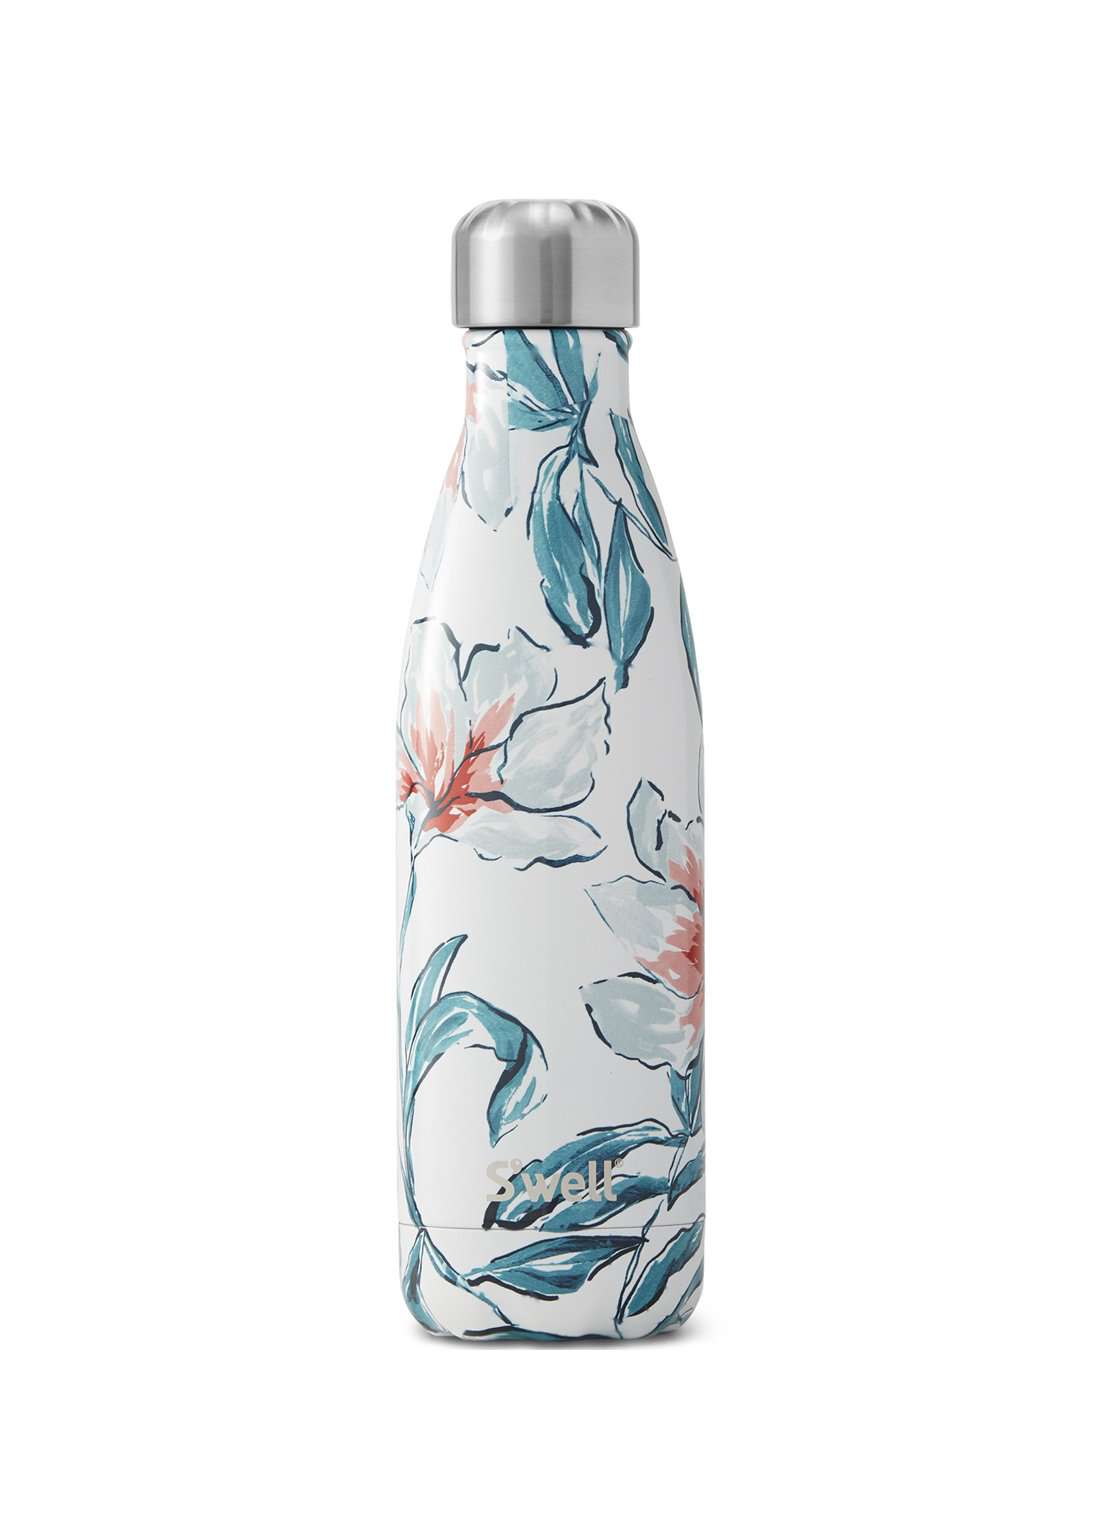 S'well Madonna Lily Water Bottle Home & Lifestyle